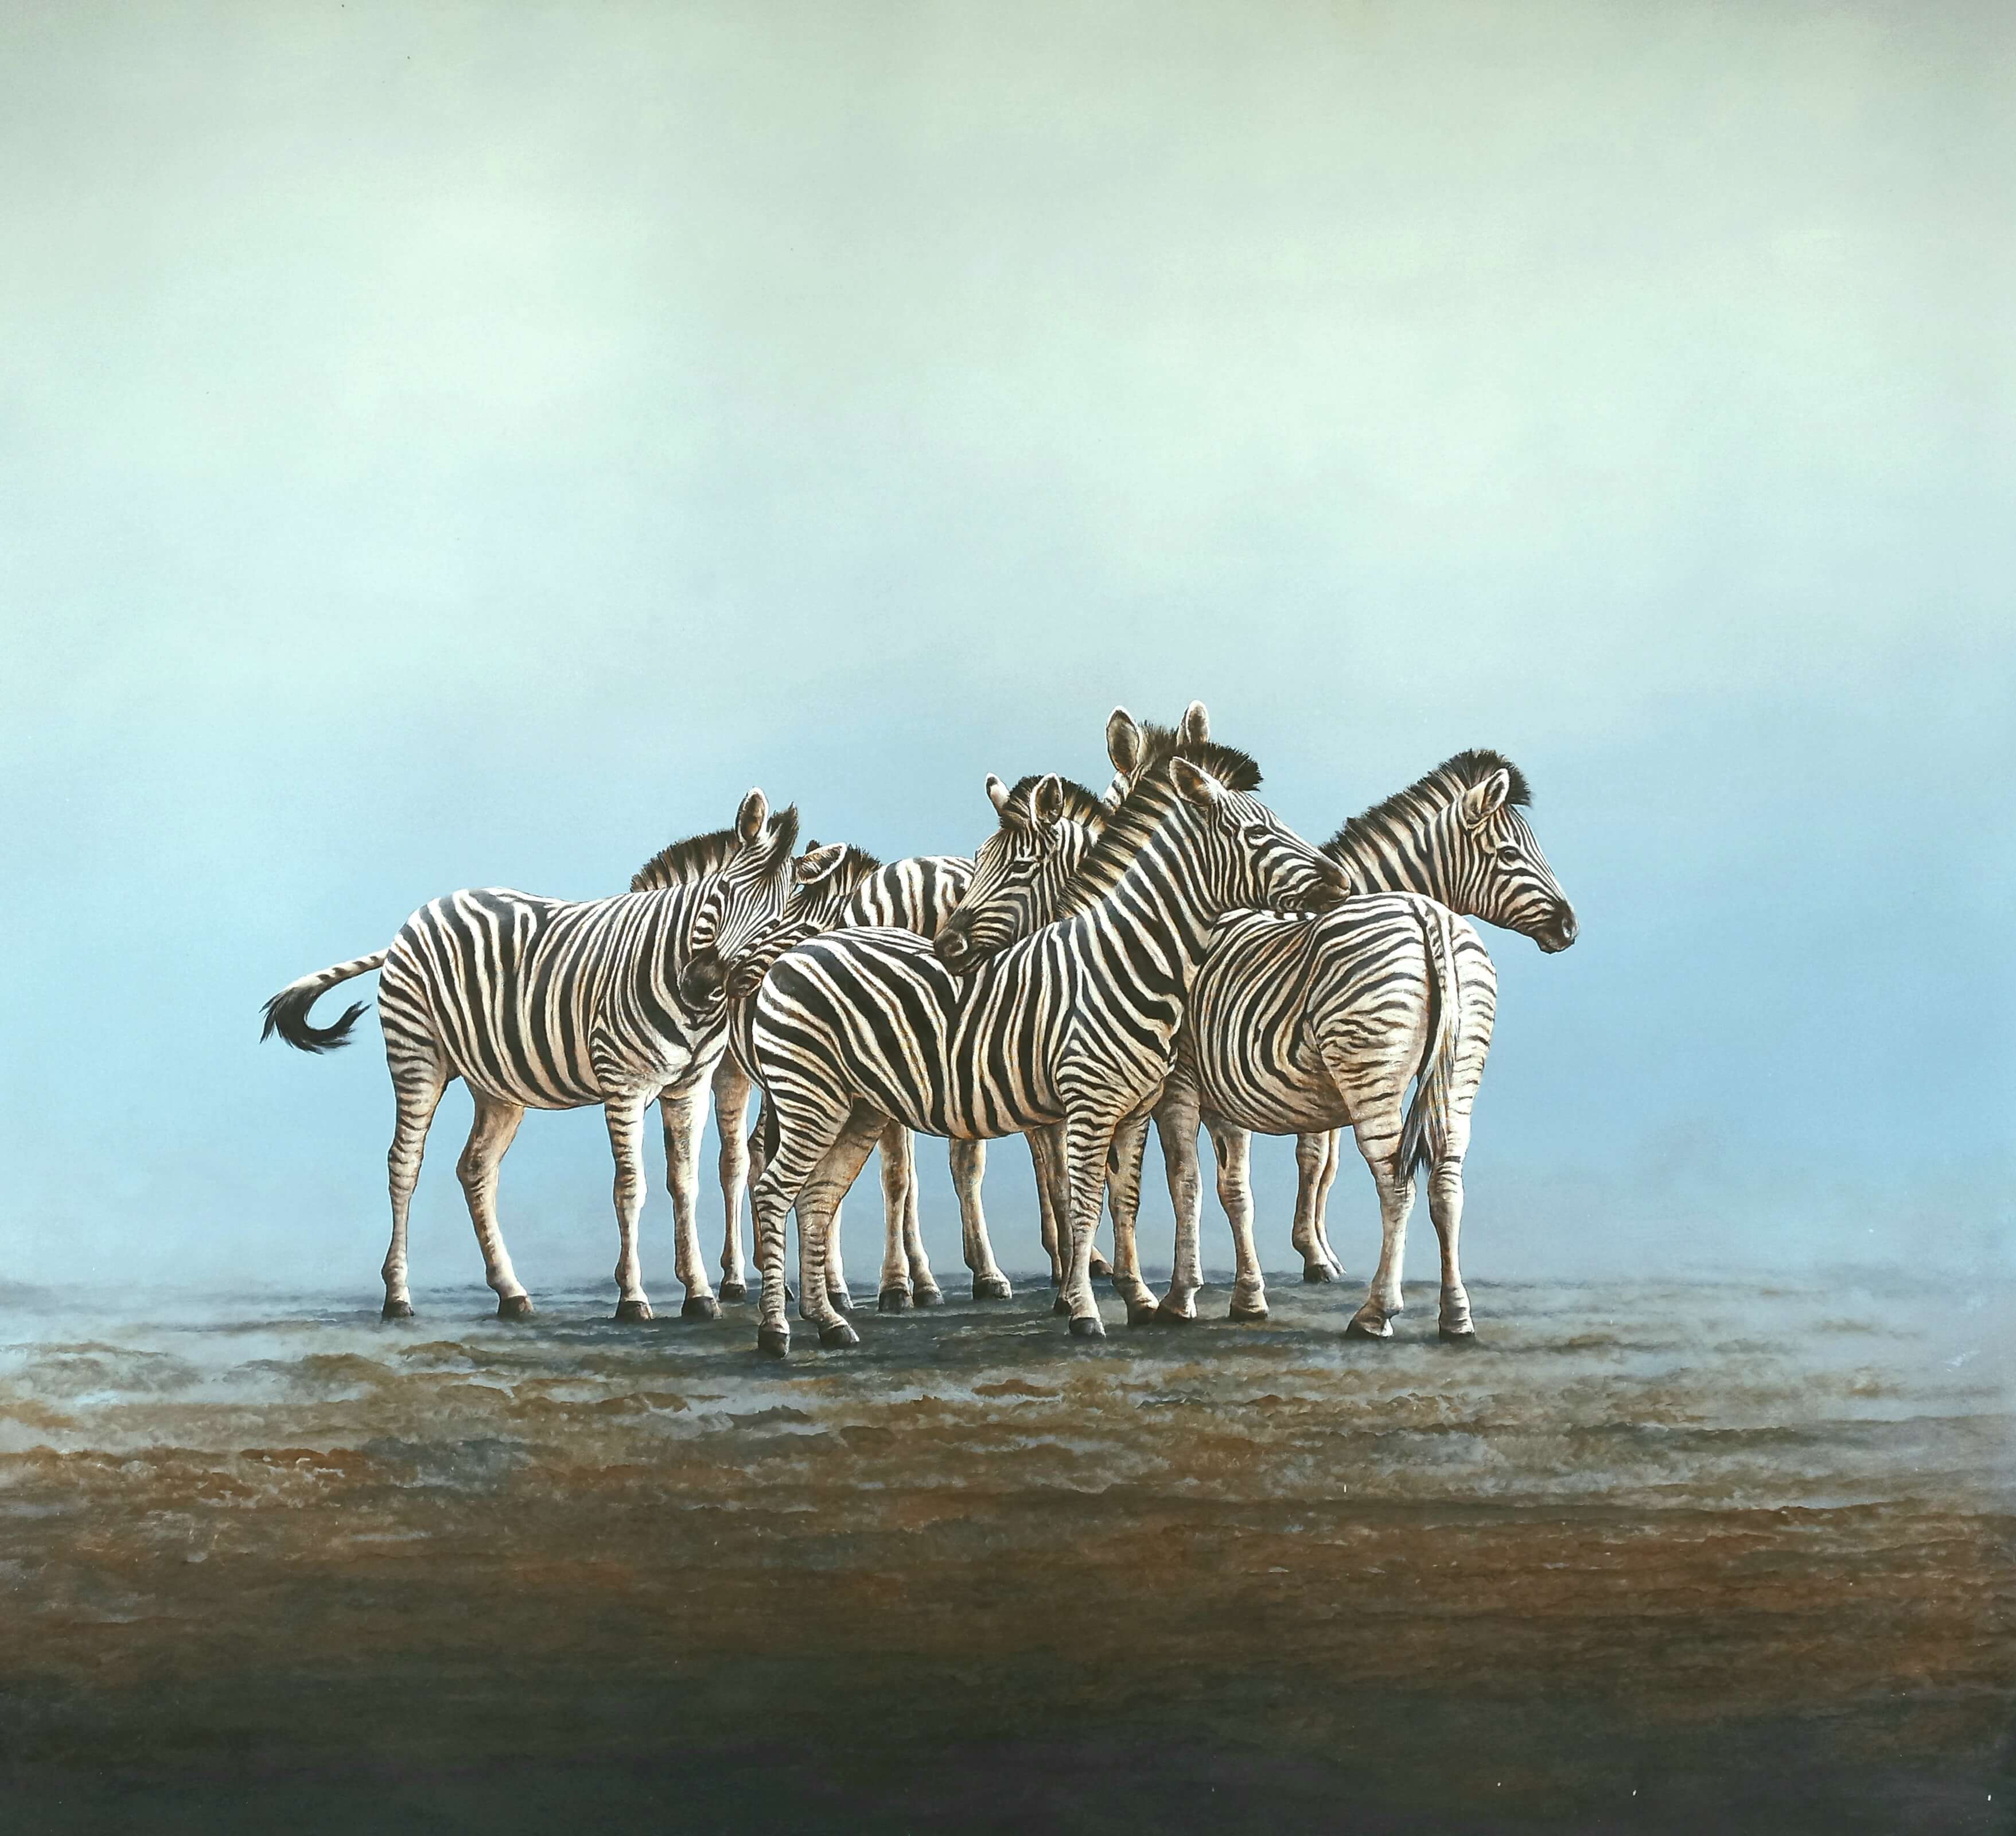 Group of zebras in a field that have now been painted with details.